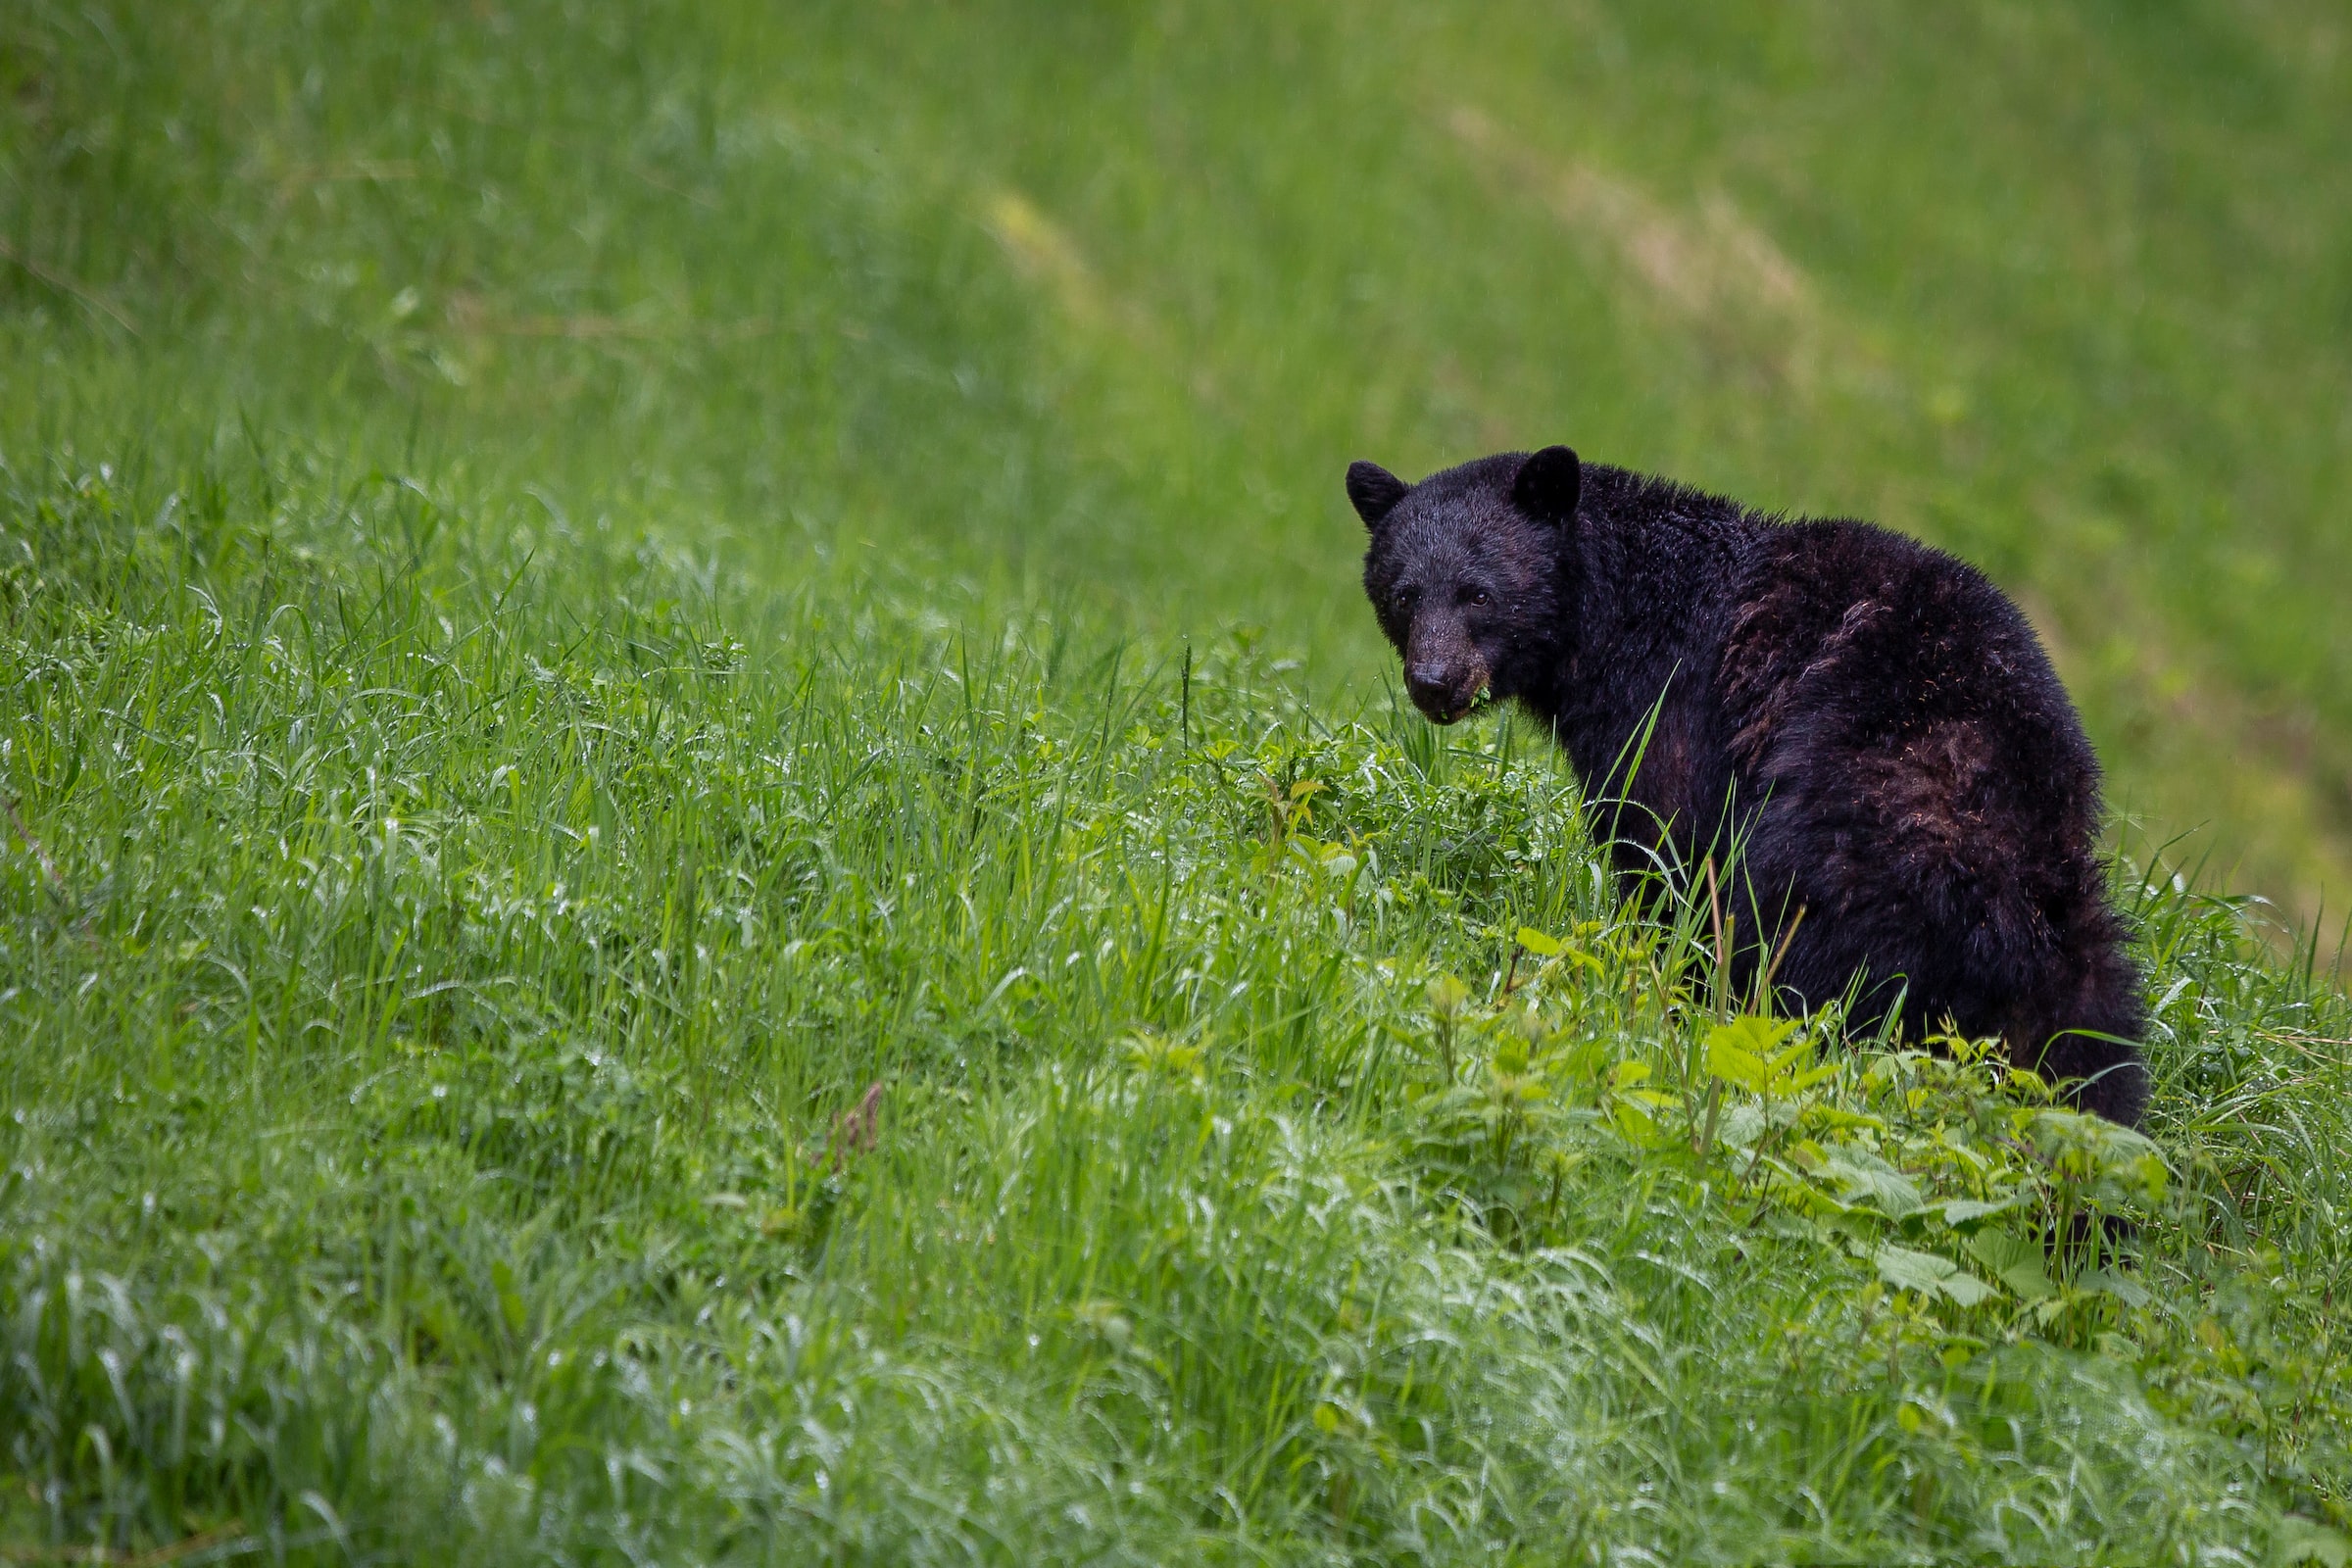 Image shows bear on hill